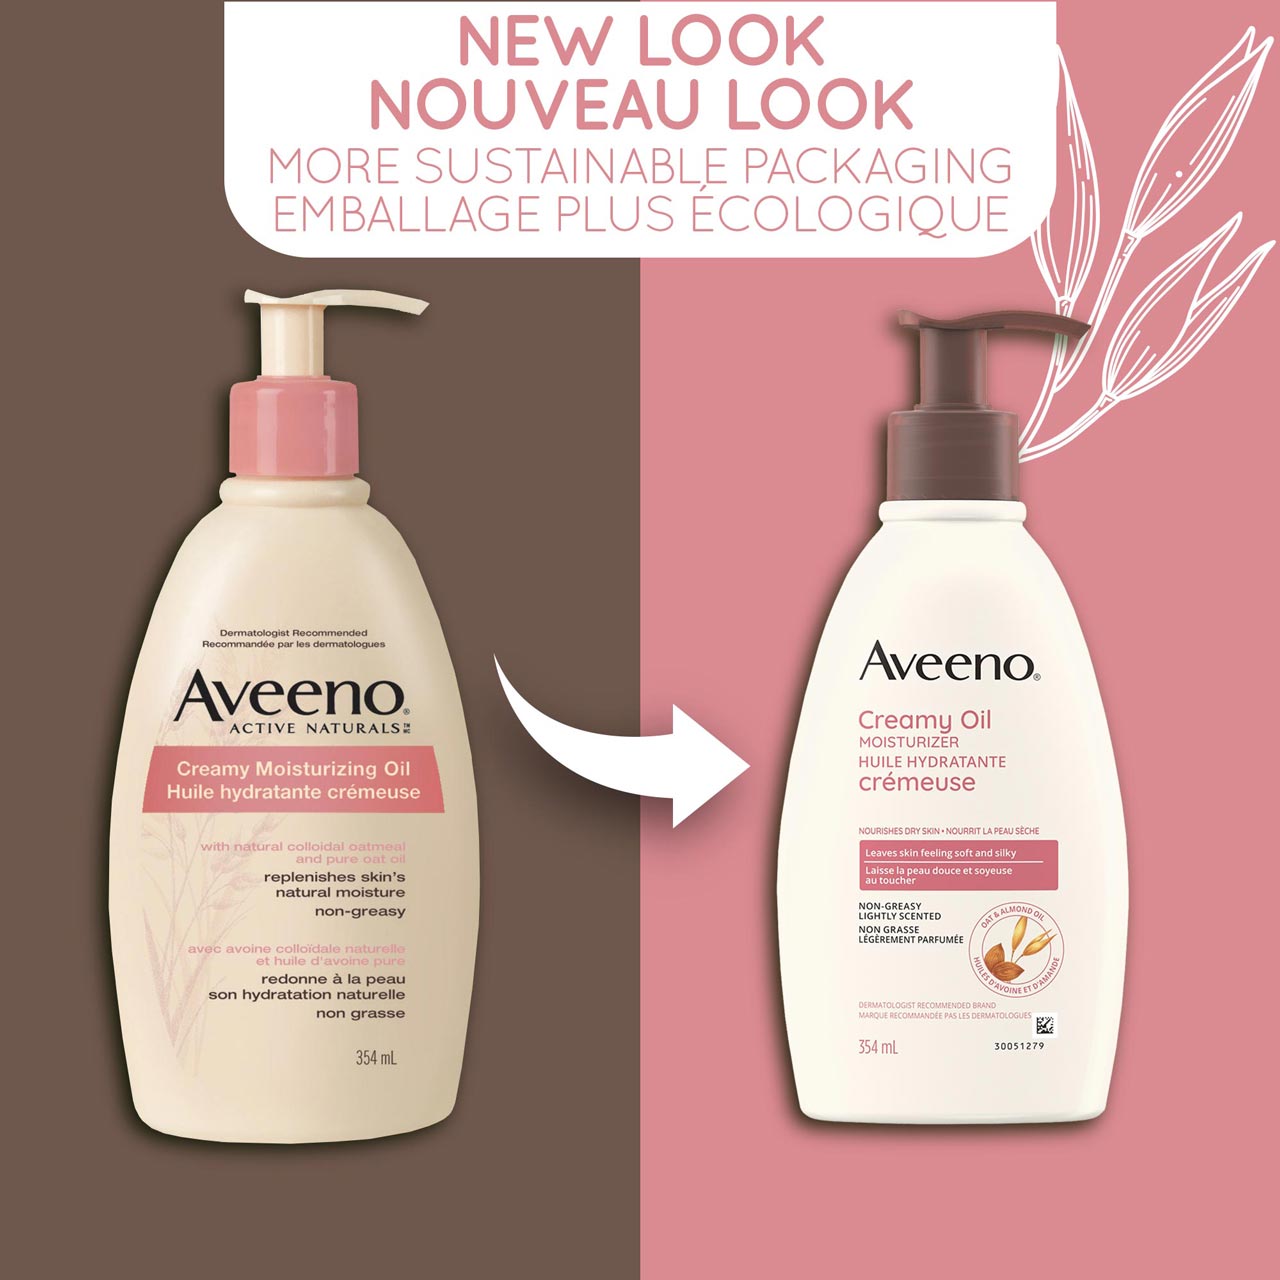 An old and a new packaging of Aveeno Creamy Moisturizing Oil pump bottle, 354mL and a text stating 'New Look, More Sustainable Packaging'